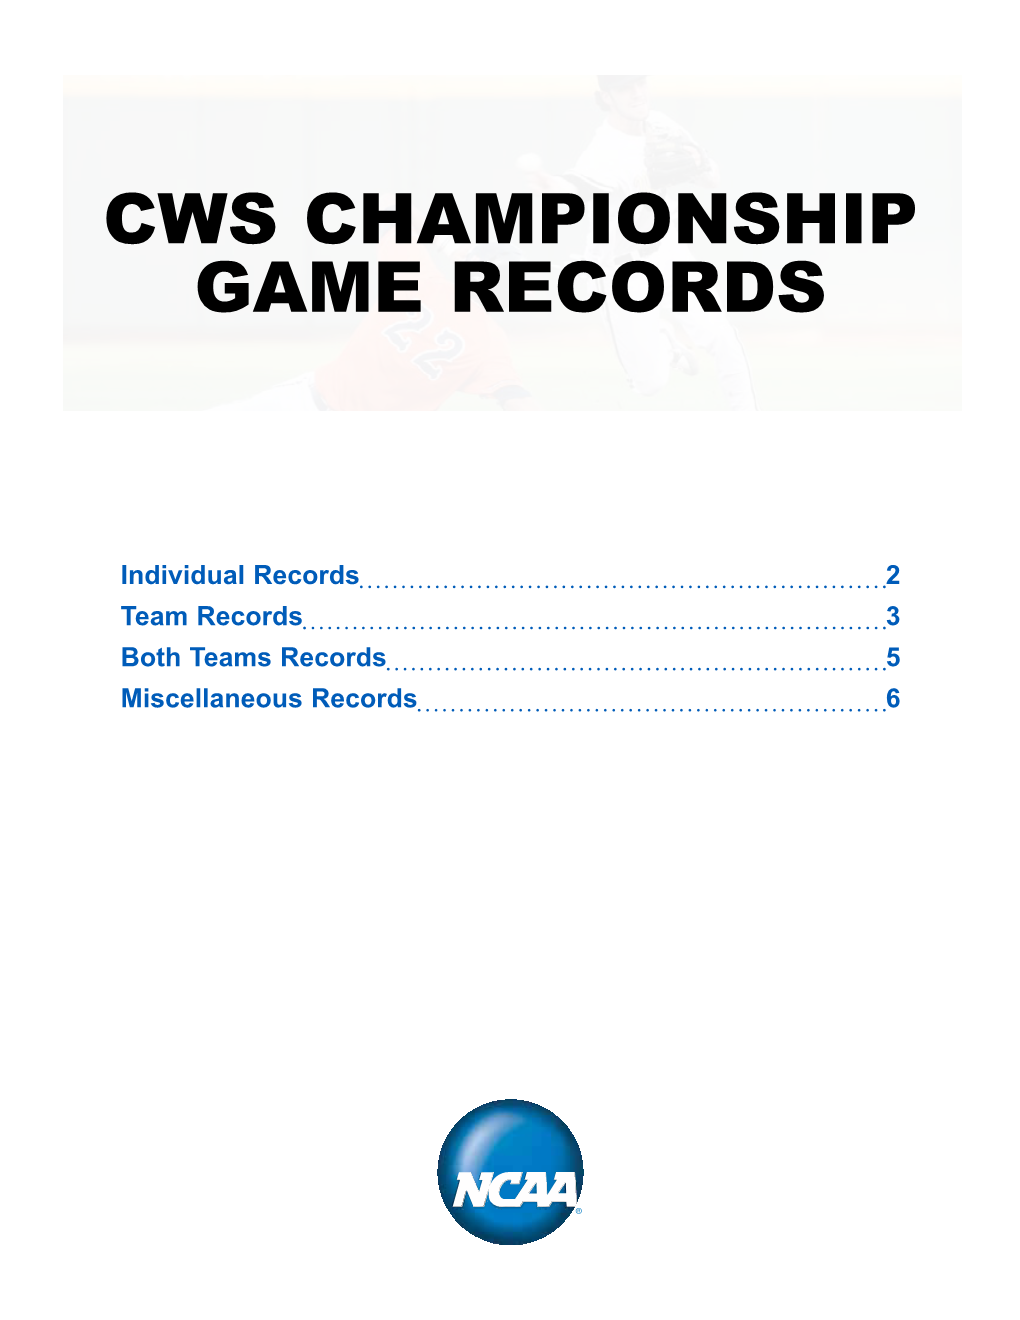 CWS Championship Game Records